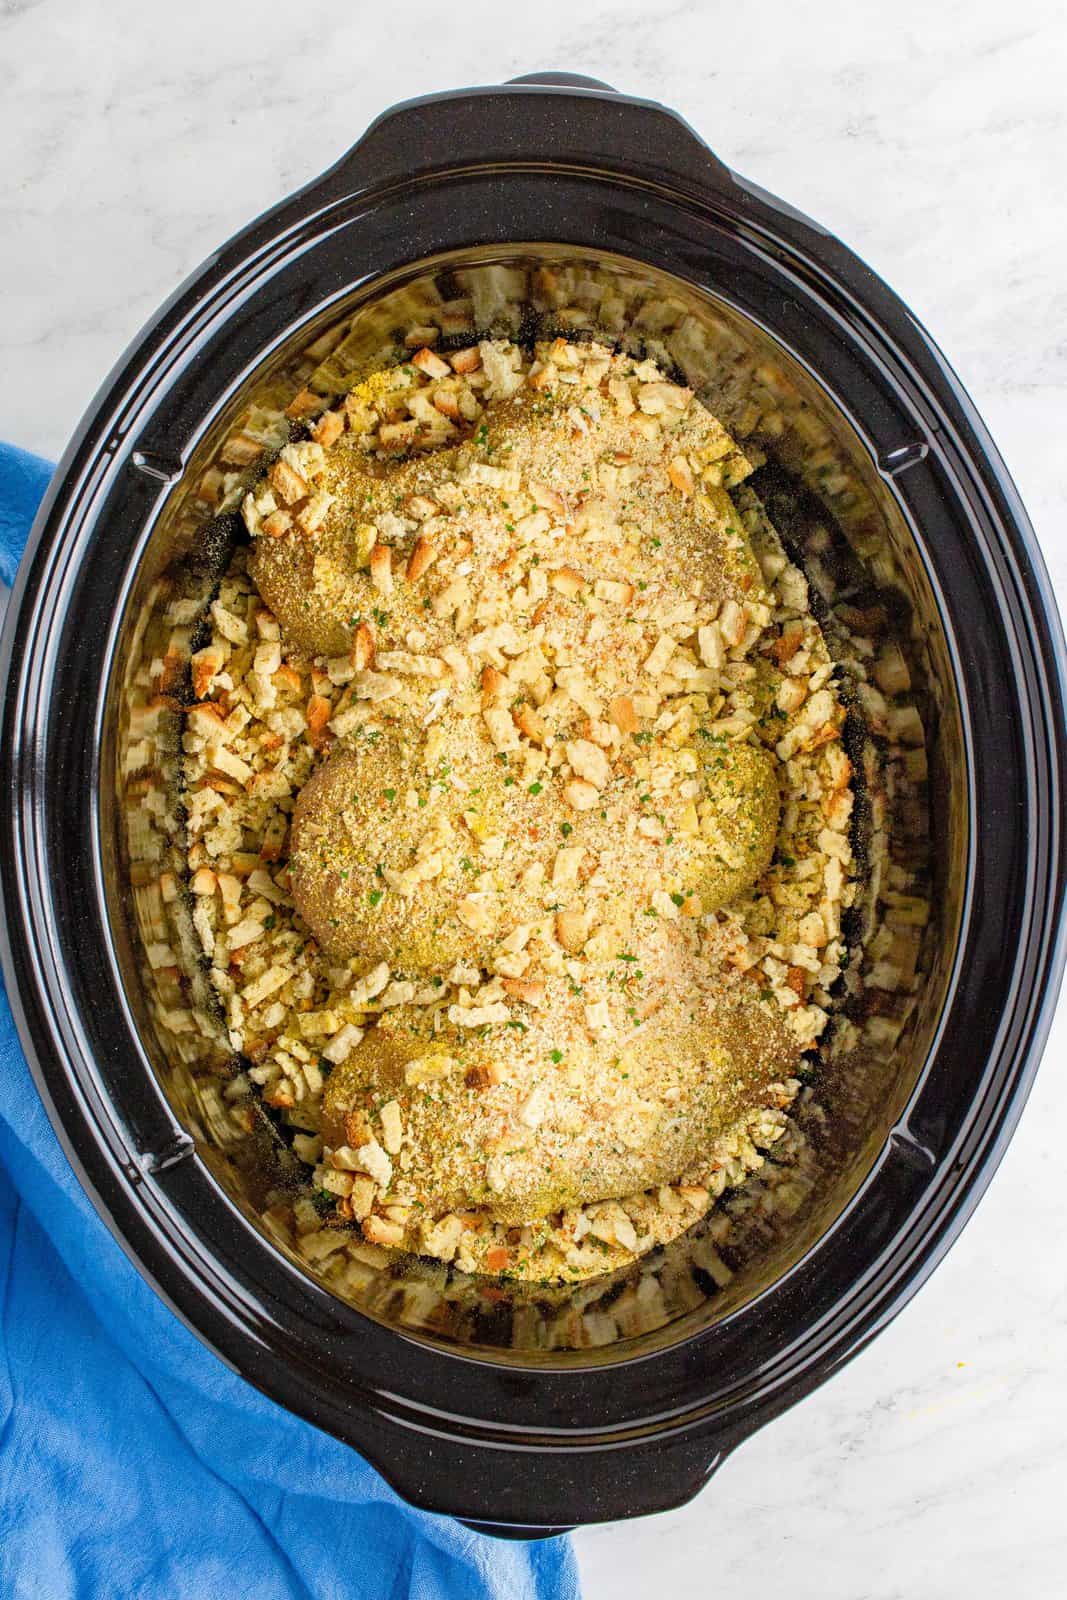 Stove Top stuffing sprinkled evenly over chicken breasts in slow cooker.